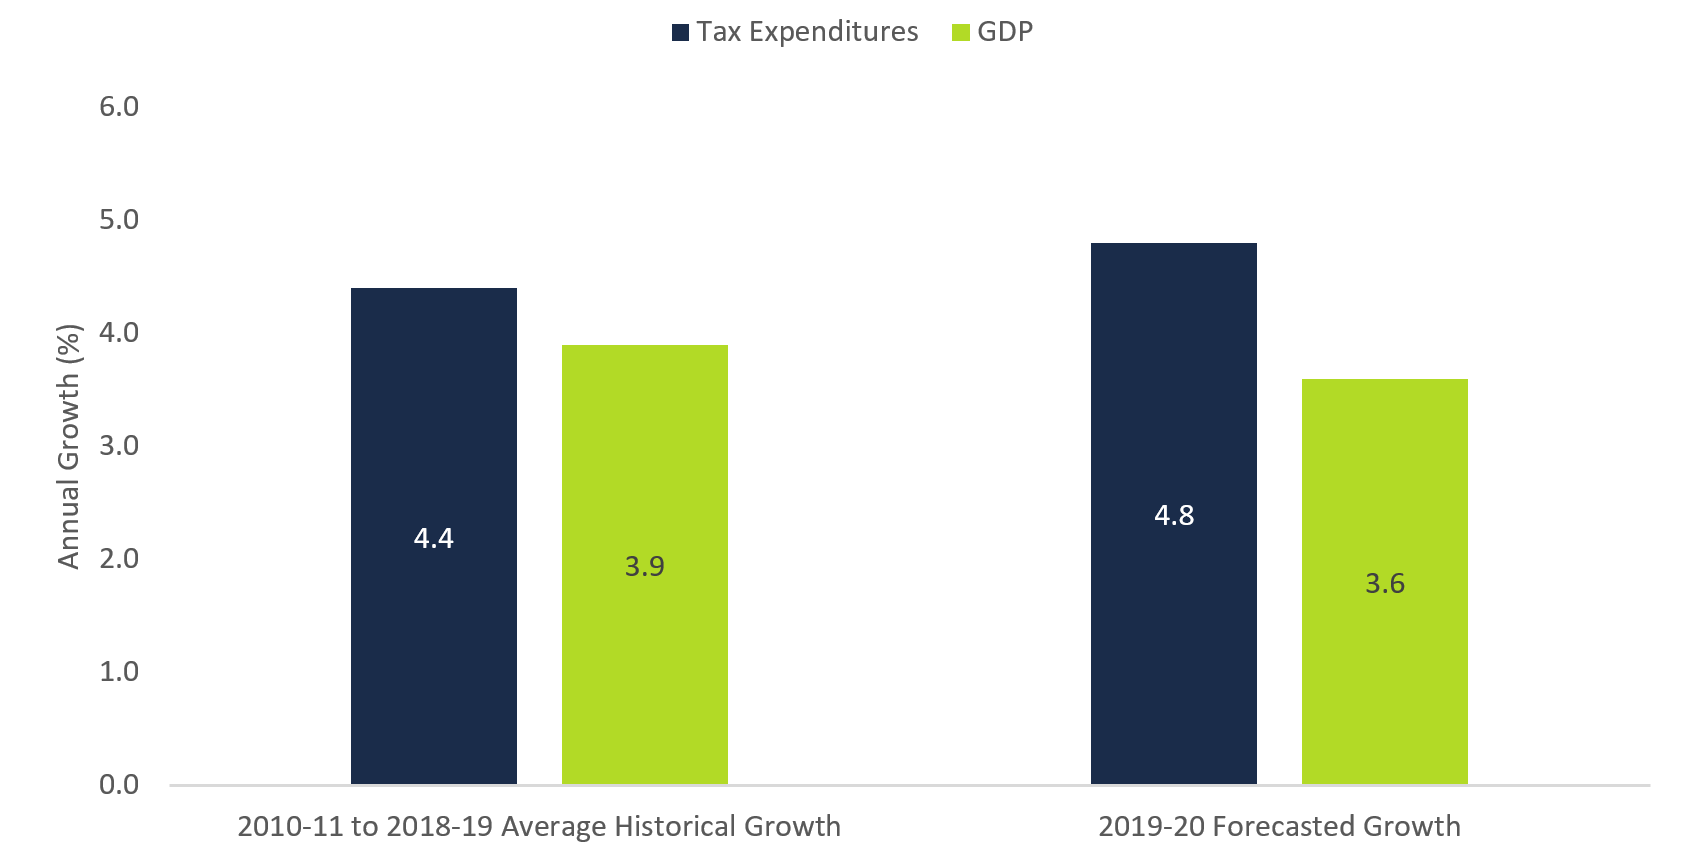 Figure 4 1: Tax expenditure spending growth higher than nominal GDP growth